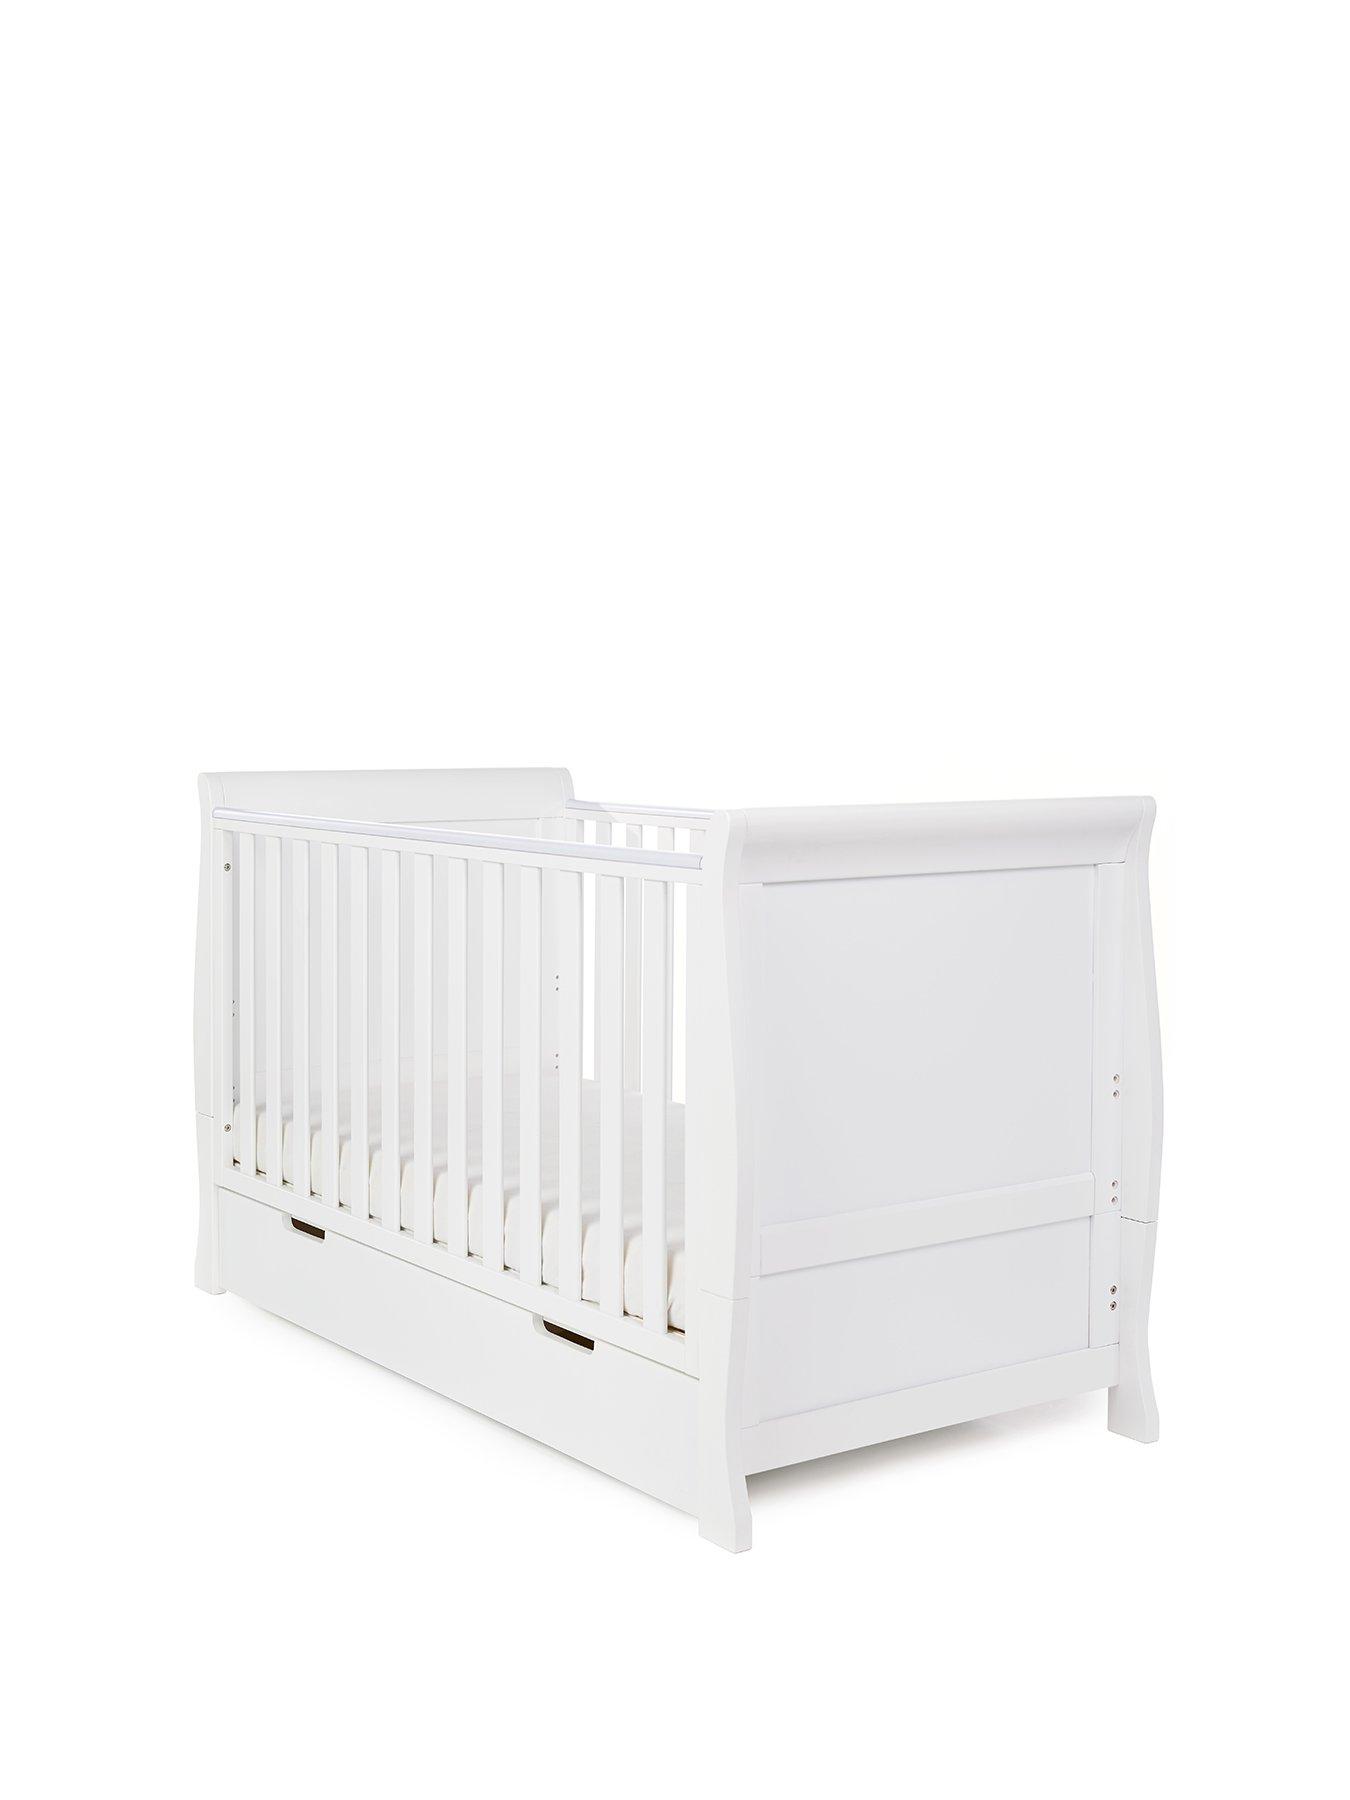 obaby sleigh cot bed